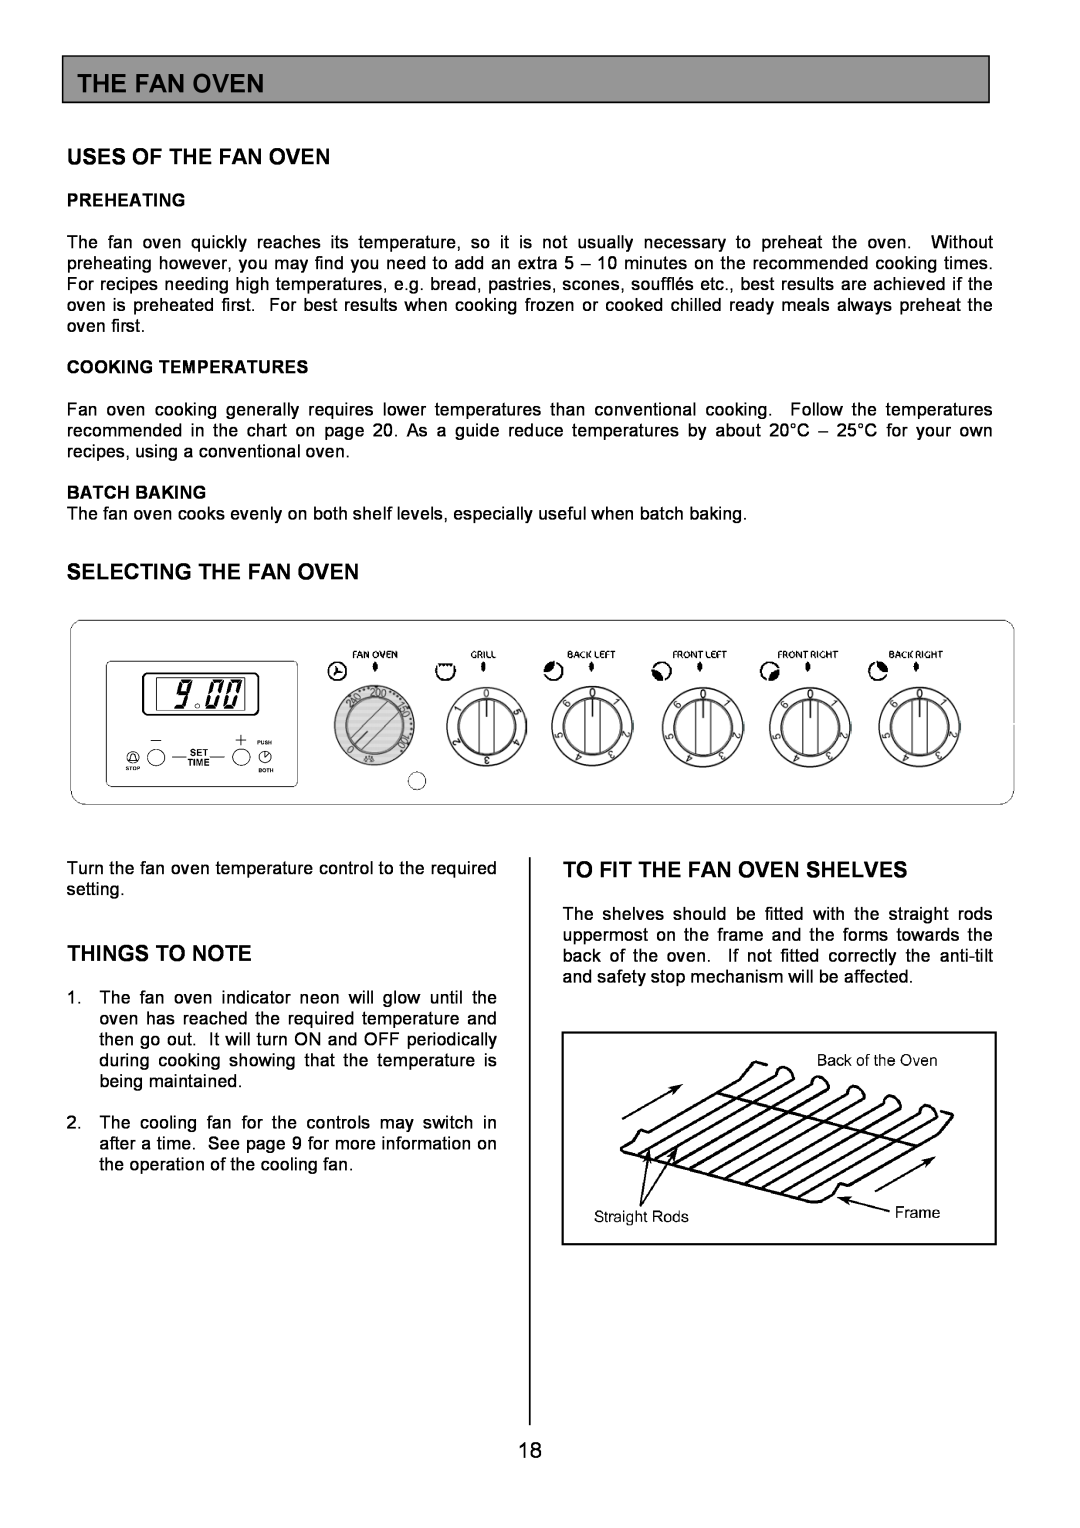 Tricity Bendix SE326 Uses Of The Fan Oven, Selecting The Fan Oven, To Fit The Fan Oven Shelves, Things To Note 